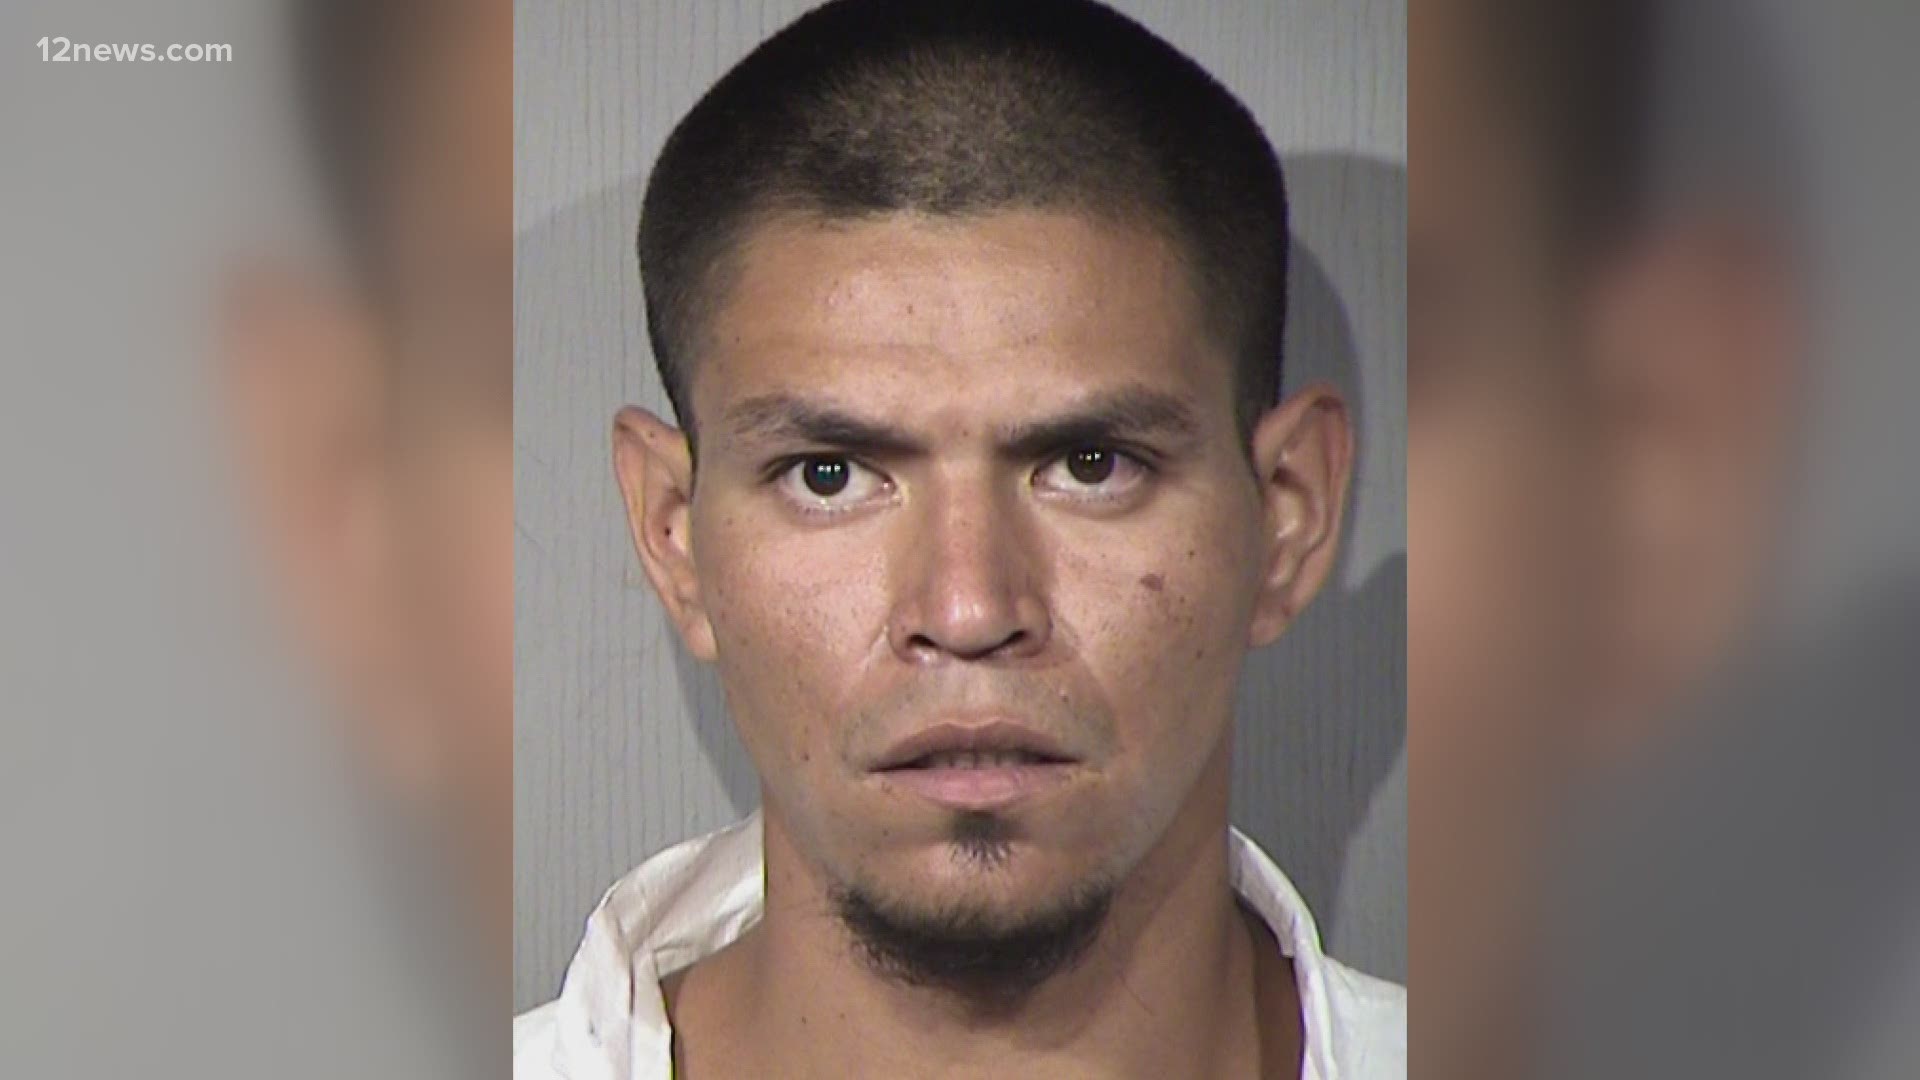 Emilio Garcia is facing sexual assault and burglary charges after police say a woman woke up to him in her bed.